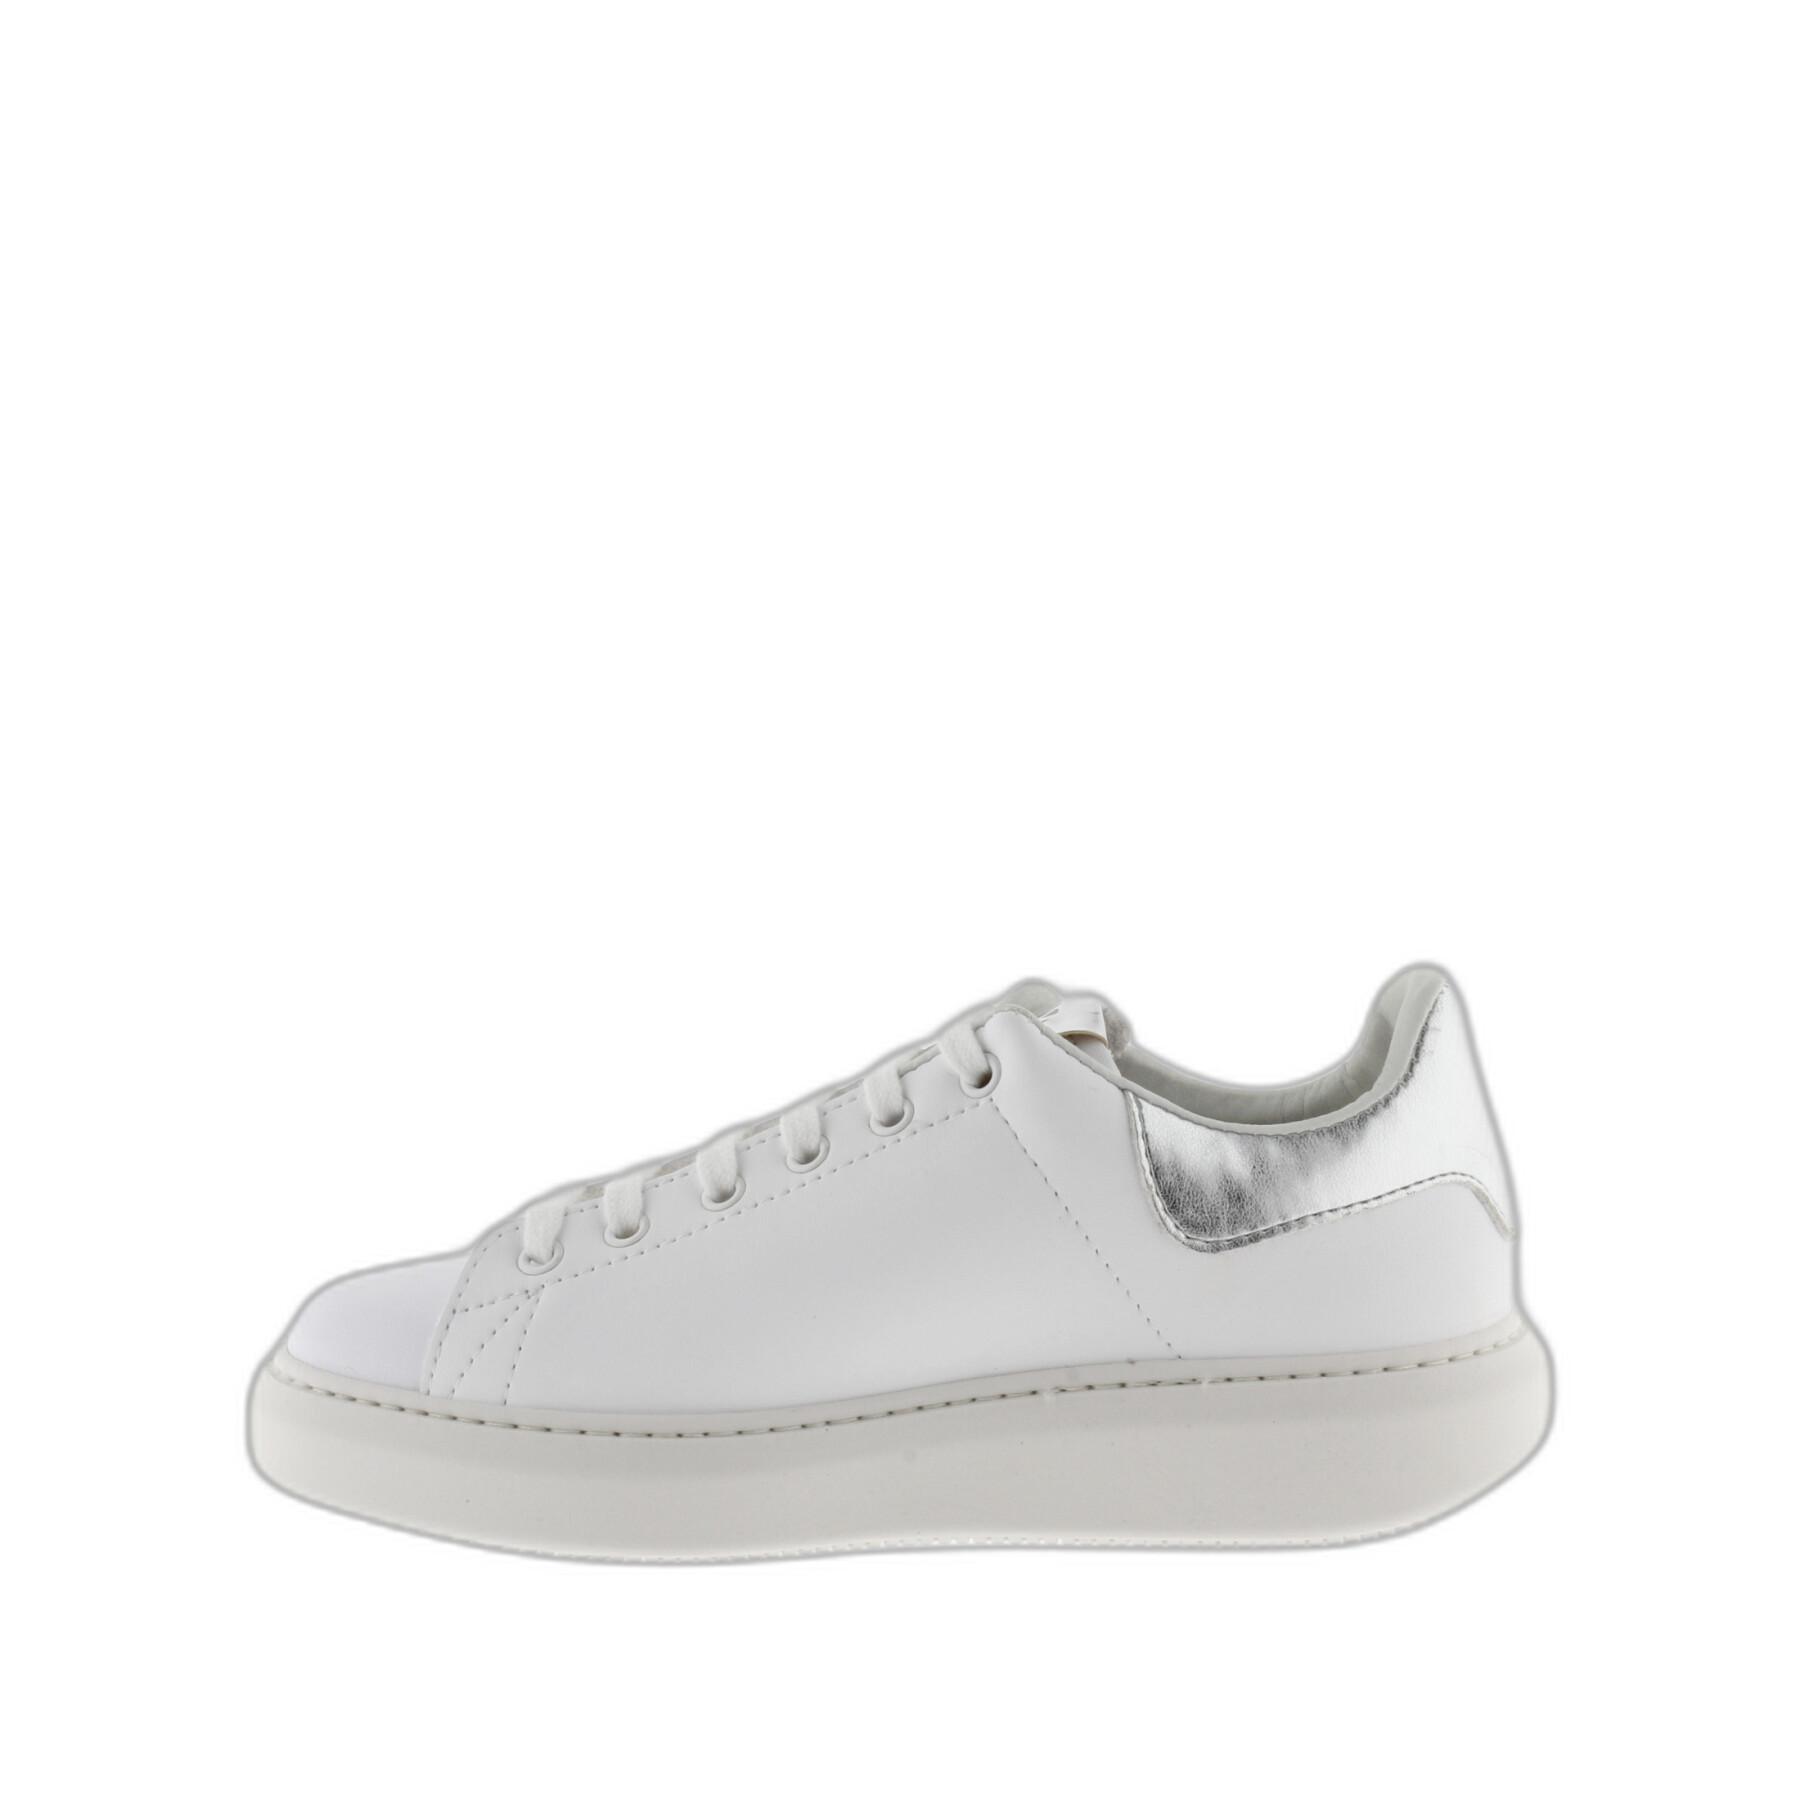 Leather and metal effect sneakers for women Victoria Milan